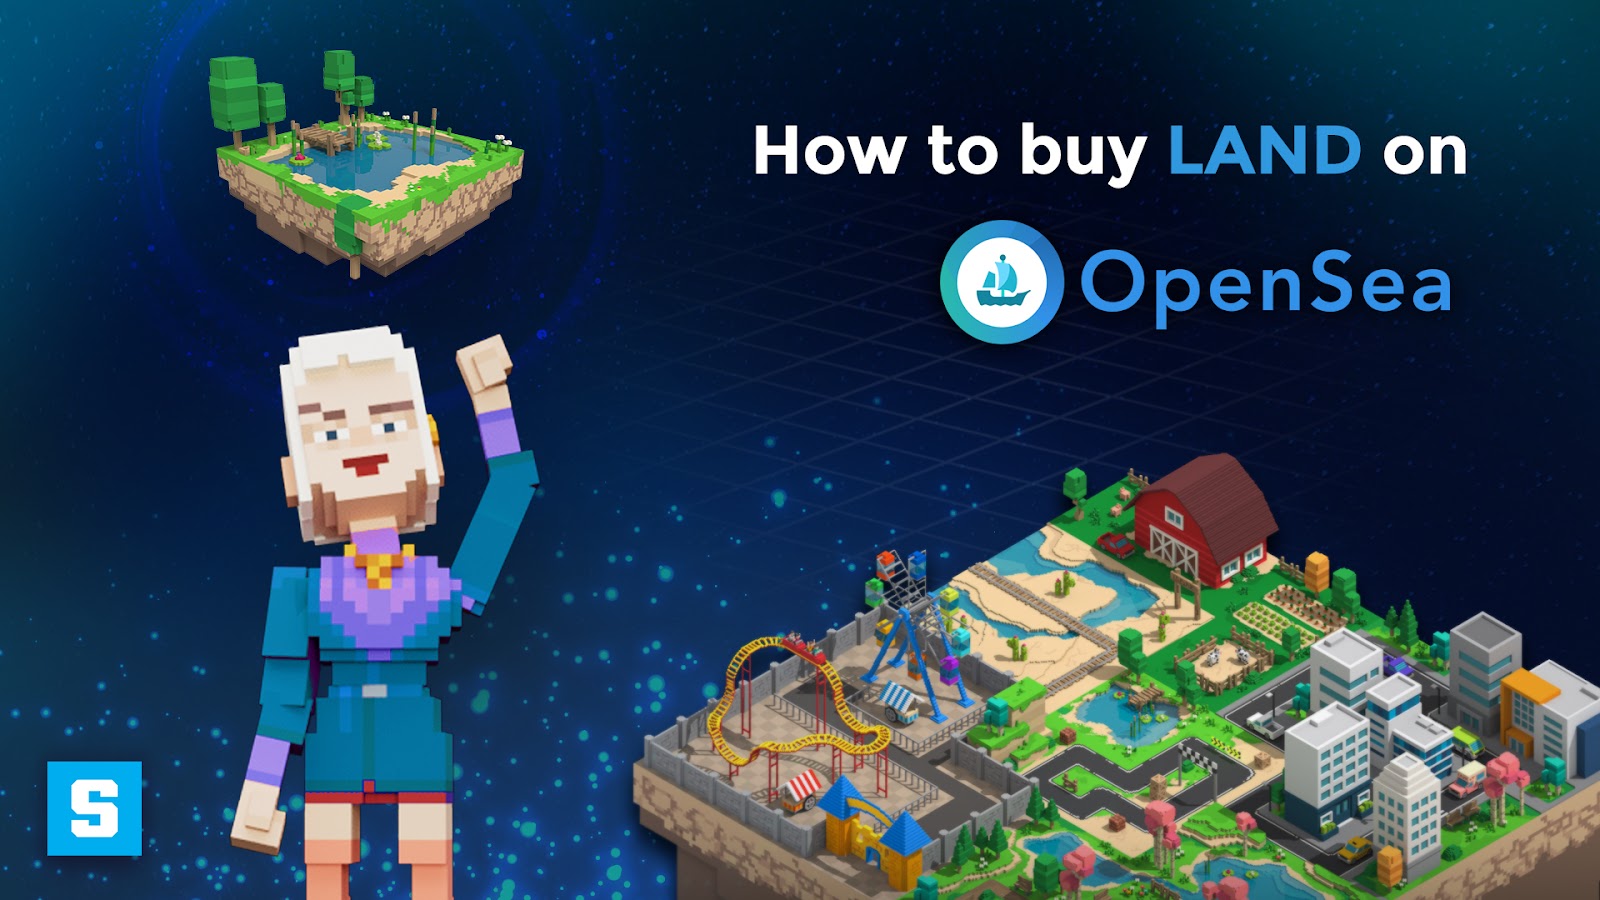 How to Buy Land on Opensea